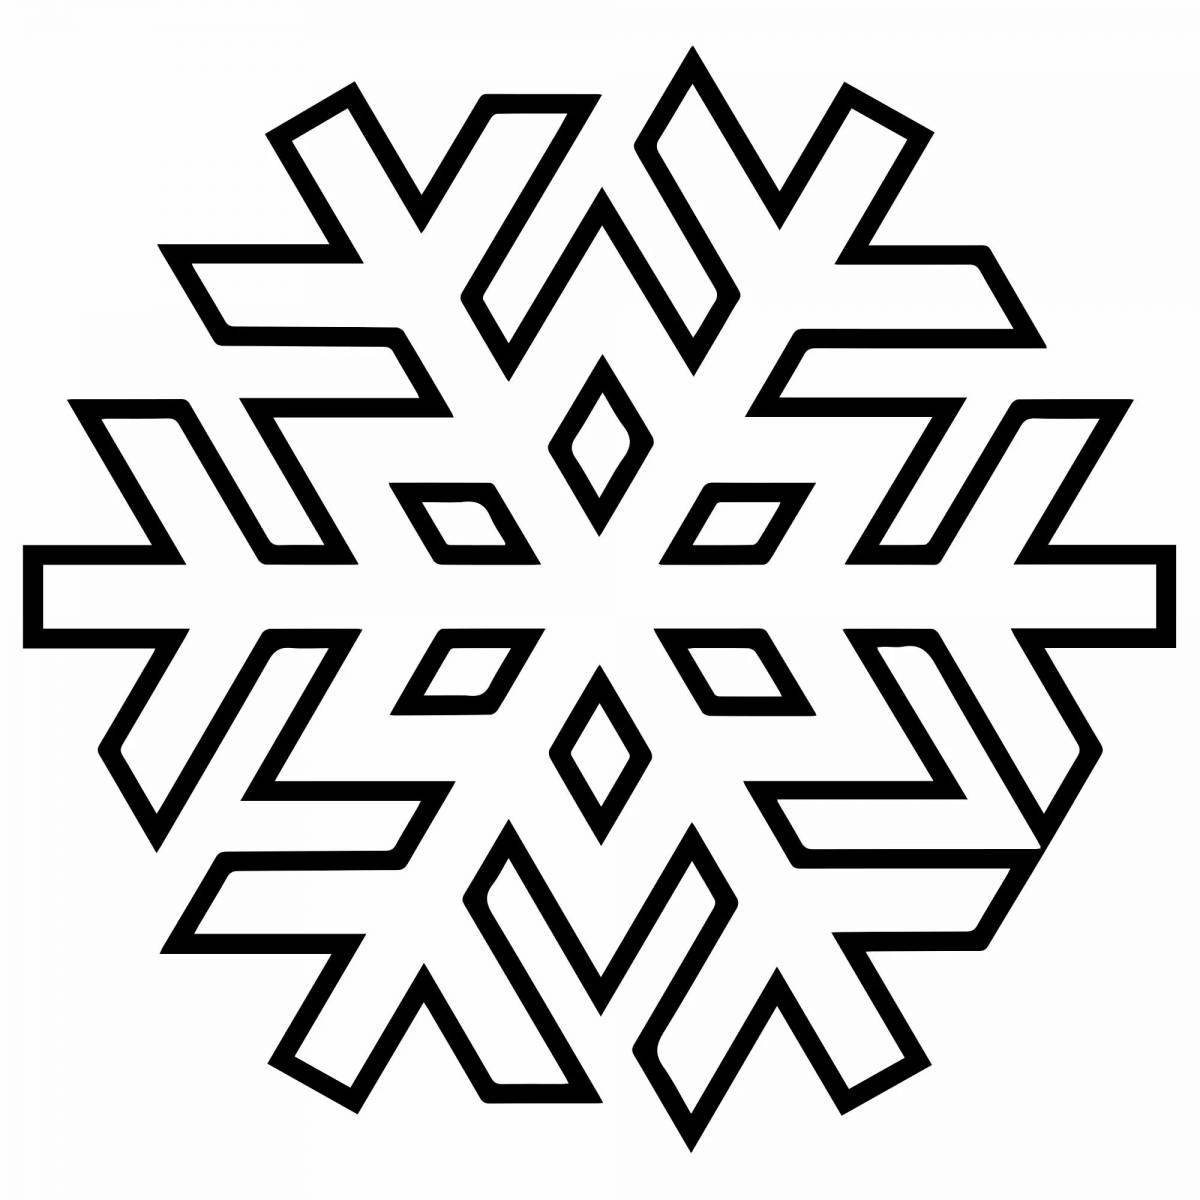 Amazing snowflake coloring book for kids 3-4 years old